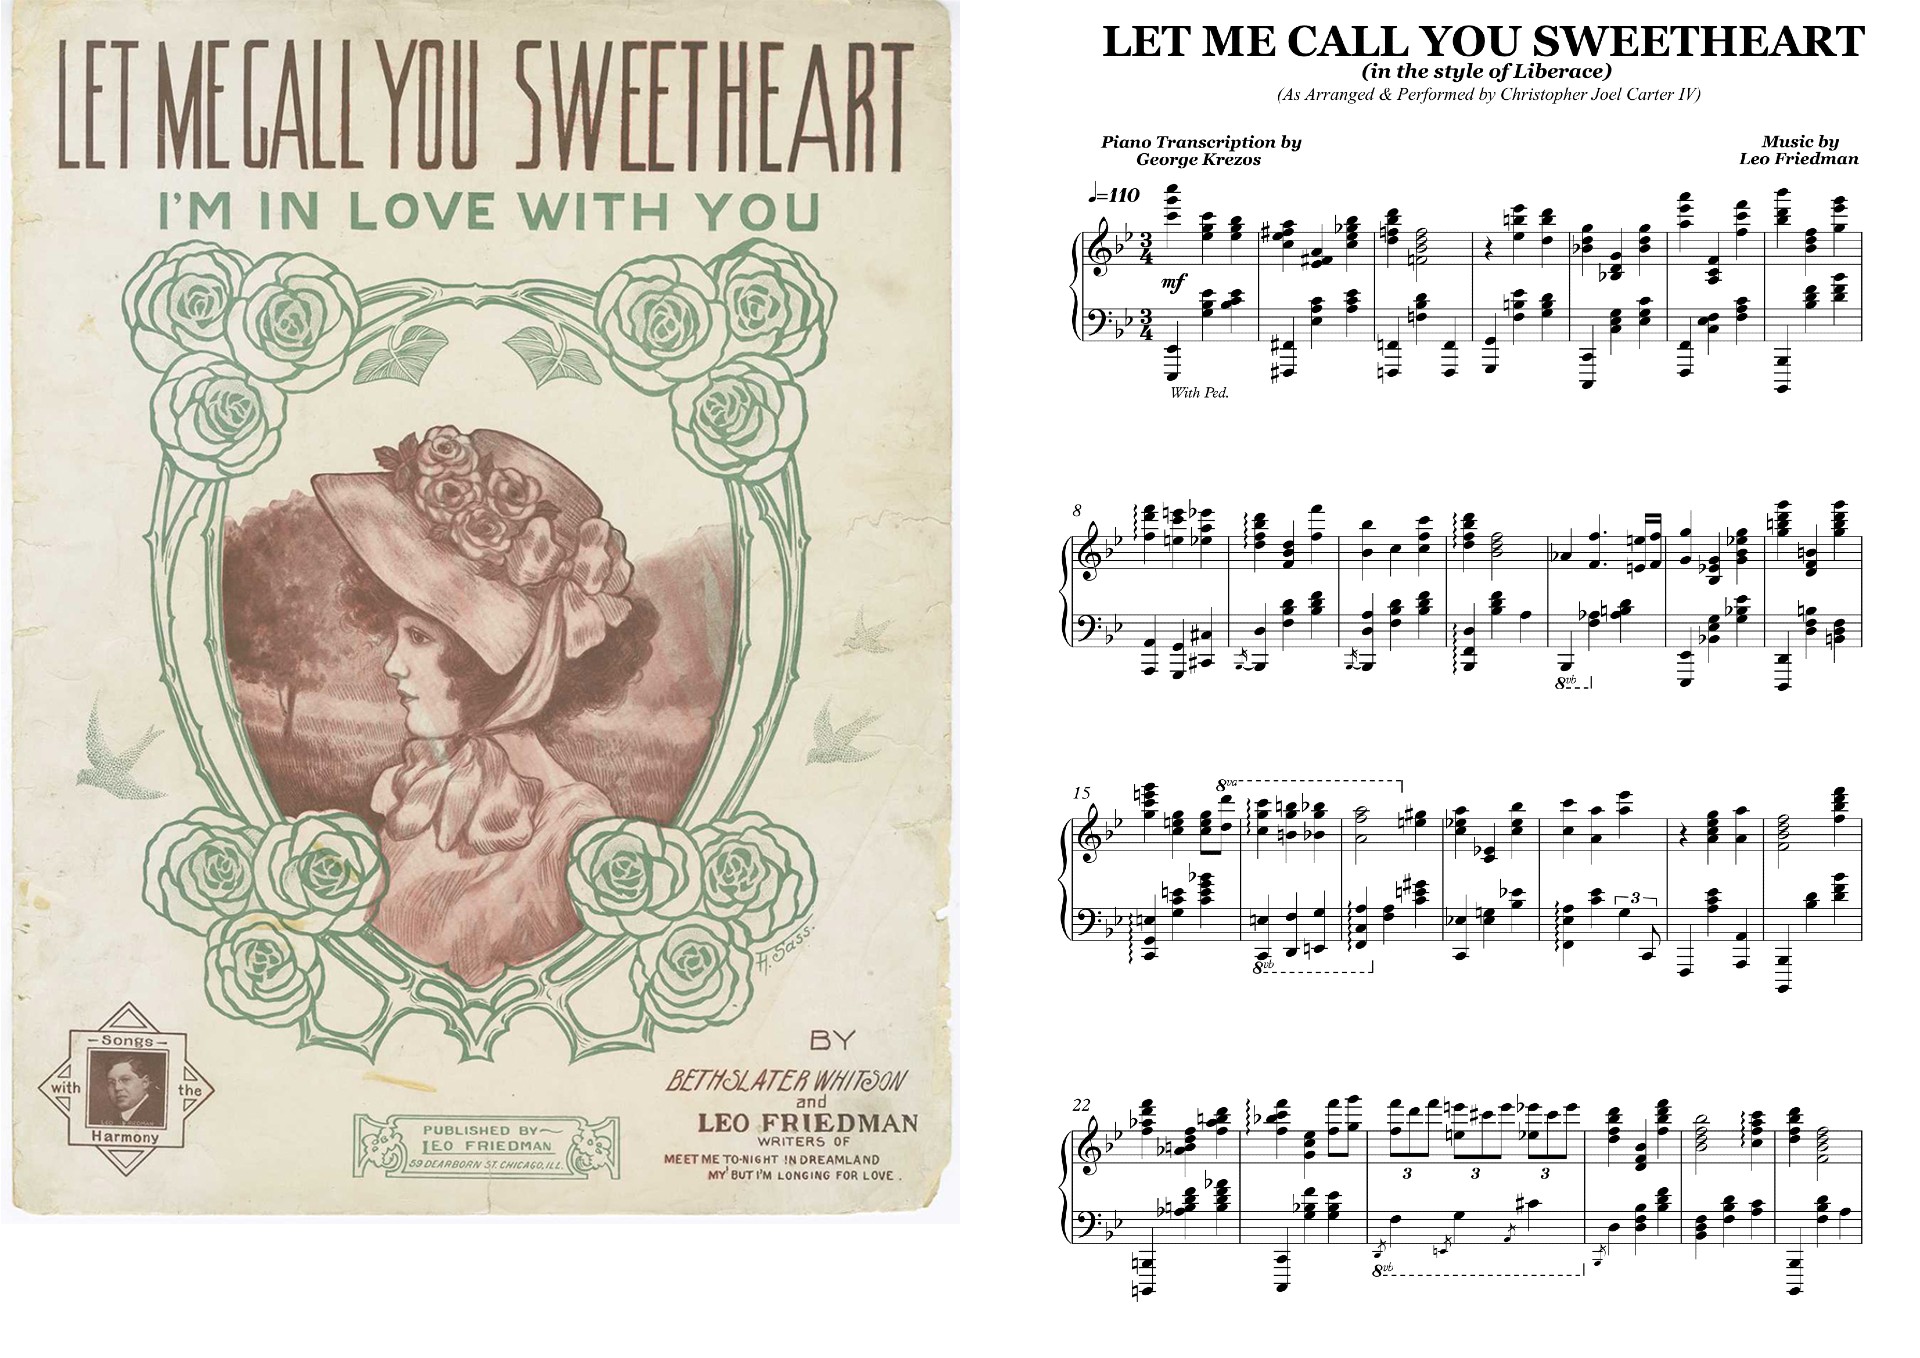 Let Me Call You Sweetheart (in the style of Liberace).jpg